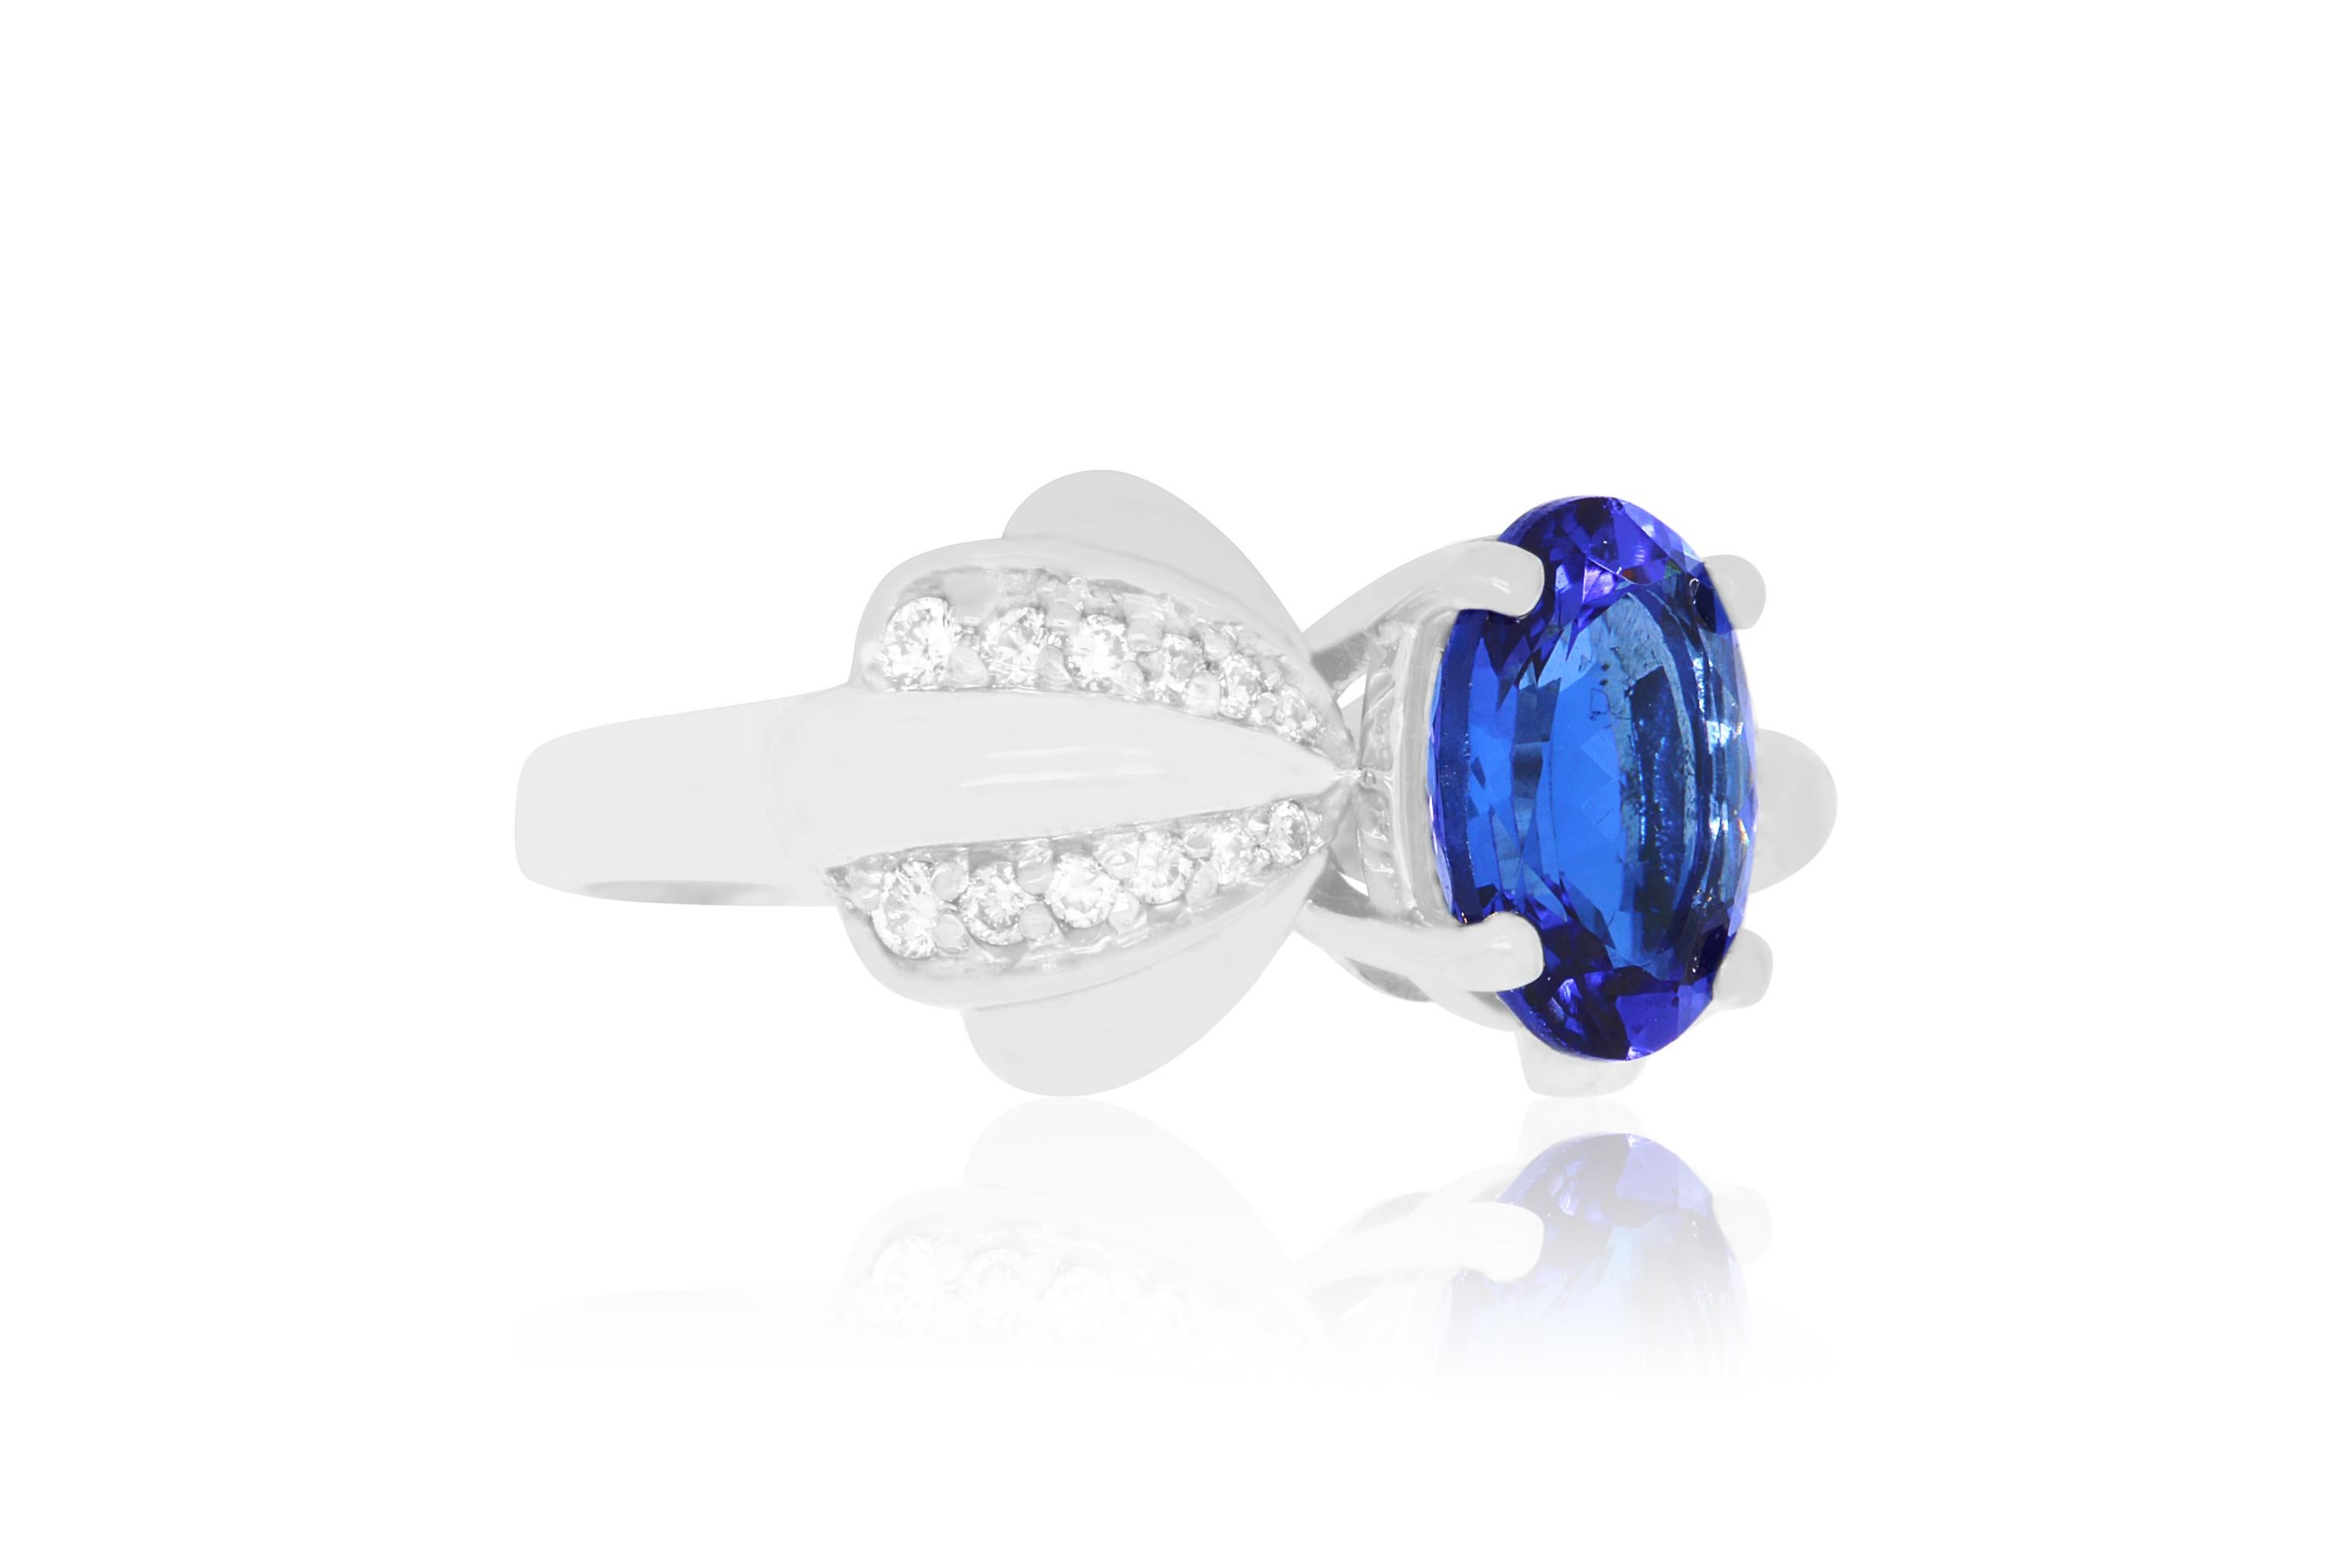 A beautiful 2.75 Carat Oval Shaped Tanzanite is perfectly set in a 14K white gold bow design. Surrounded by 24 dazzling round white diamonds totaling 0.25 Carats, this piece is a unique and chic look!

Material: 14k White Gold
Gemstones: 1 Oval